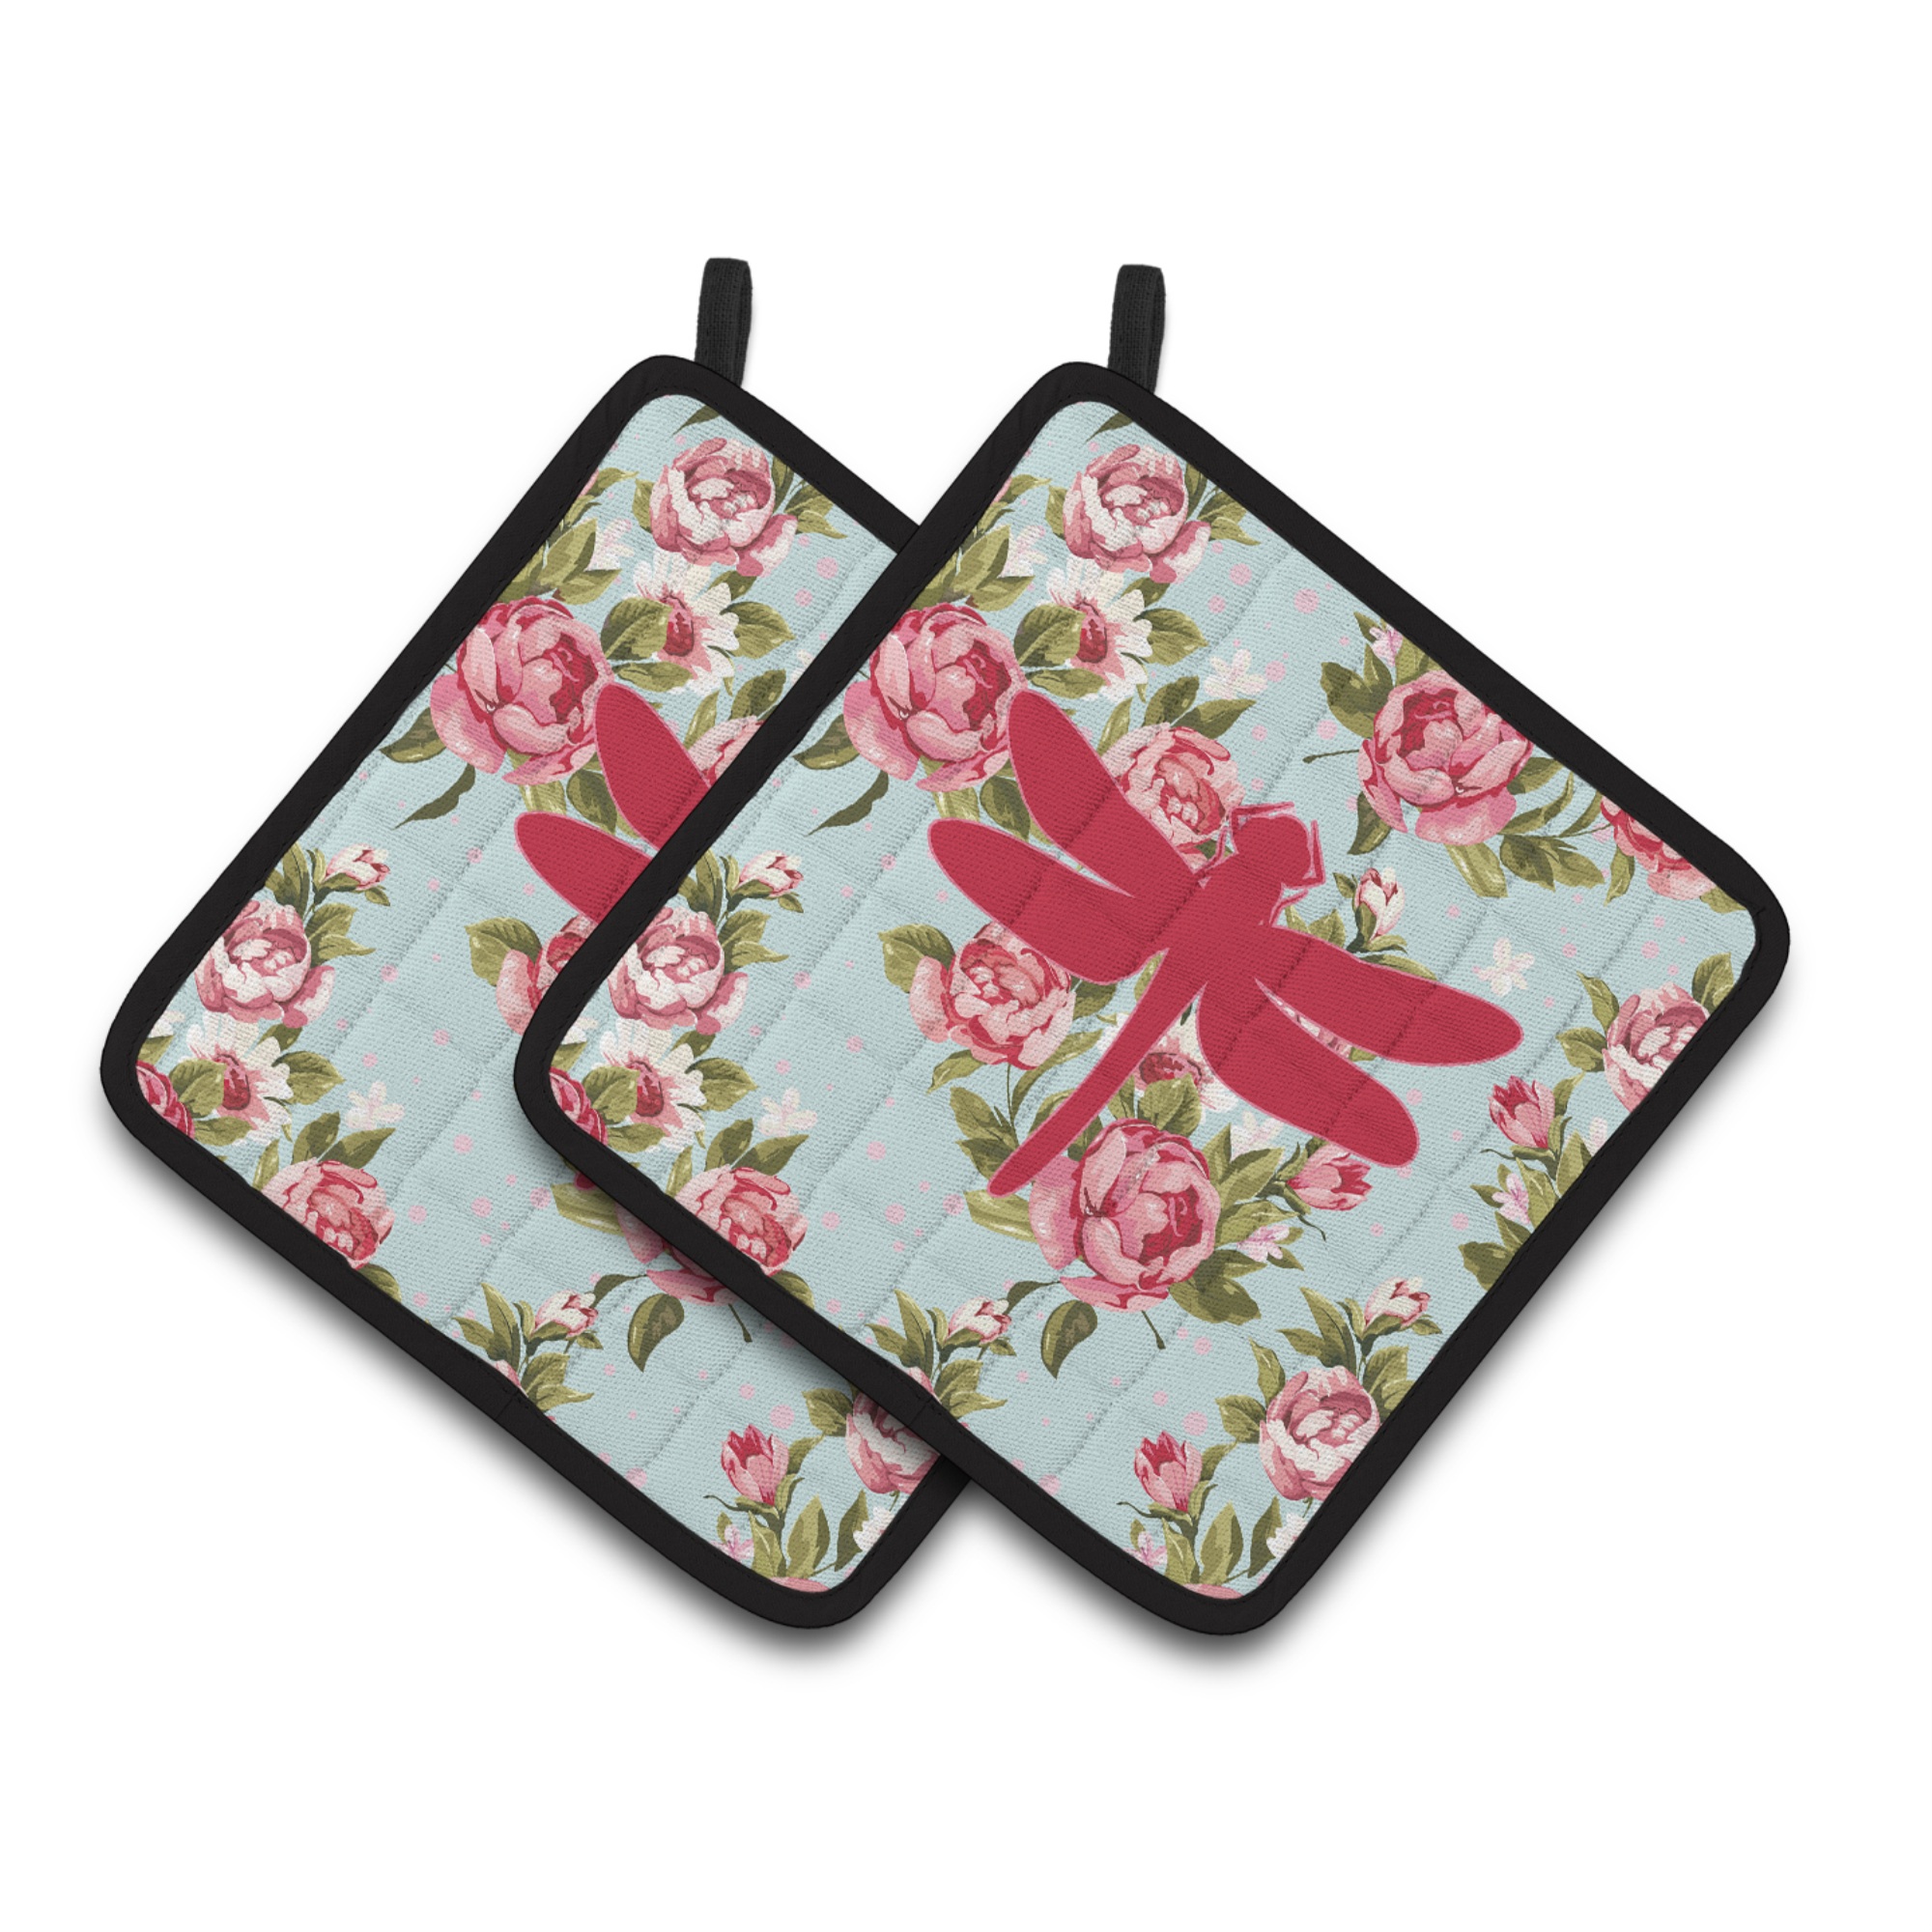 Caroline's Treasures "Caroline's Treasures Dragonfly Shabby Chic Blue Roses Pair of Pot Holders BB1062-RS-BU-PTHD, 7.5HX7.5W, Multicolor"